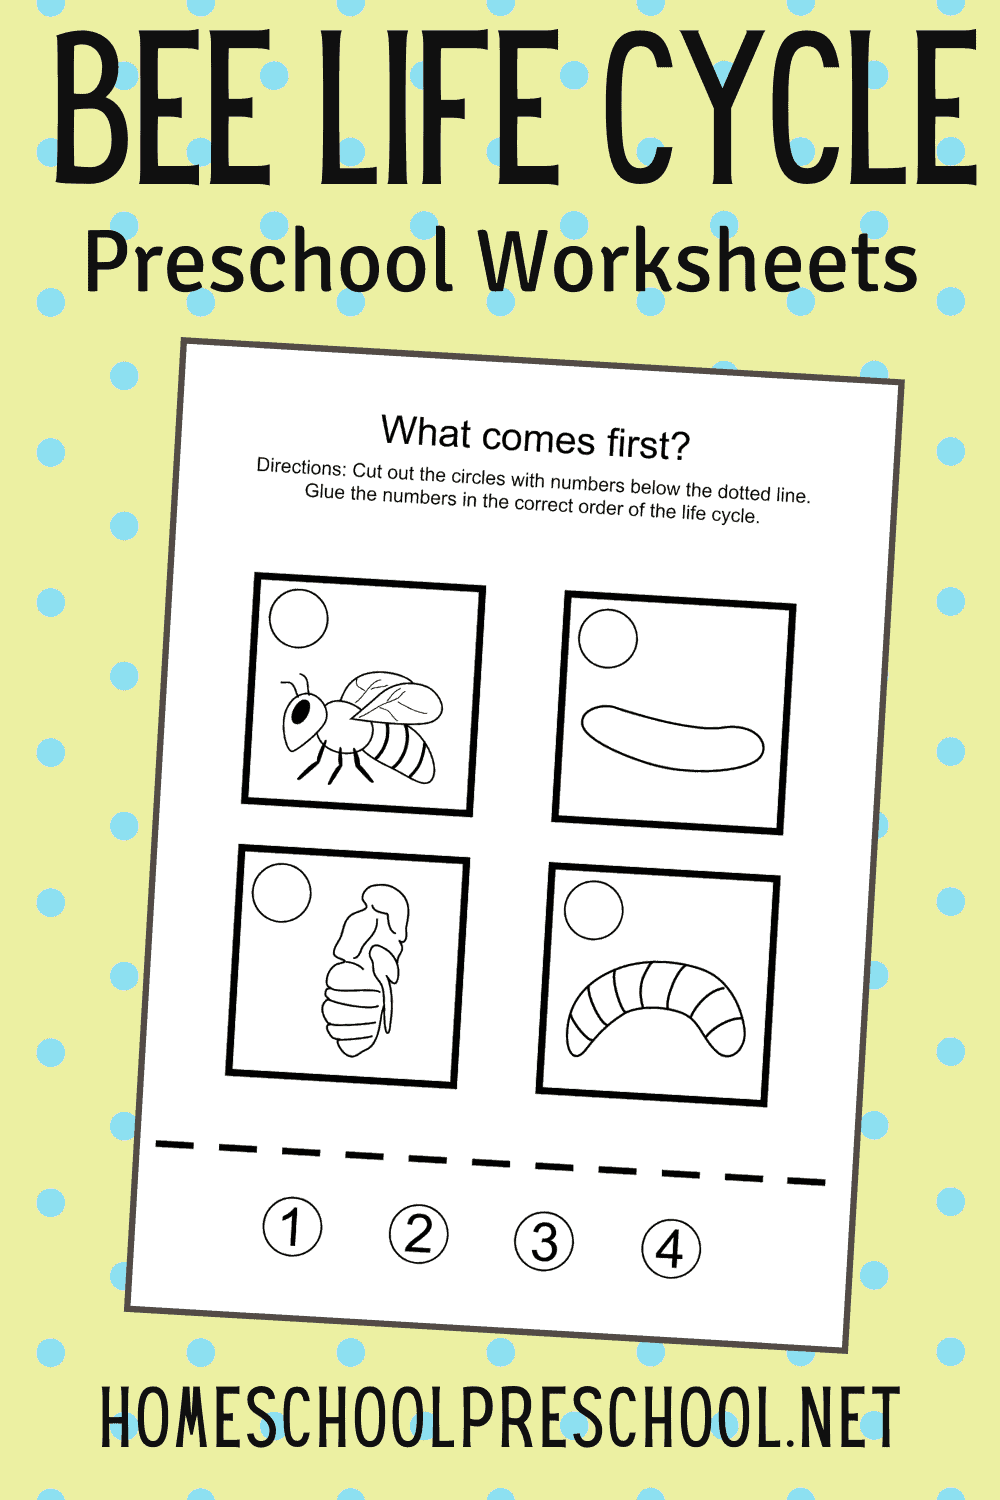 Life Cycle Of A Bee Worksheet